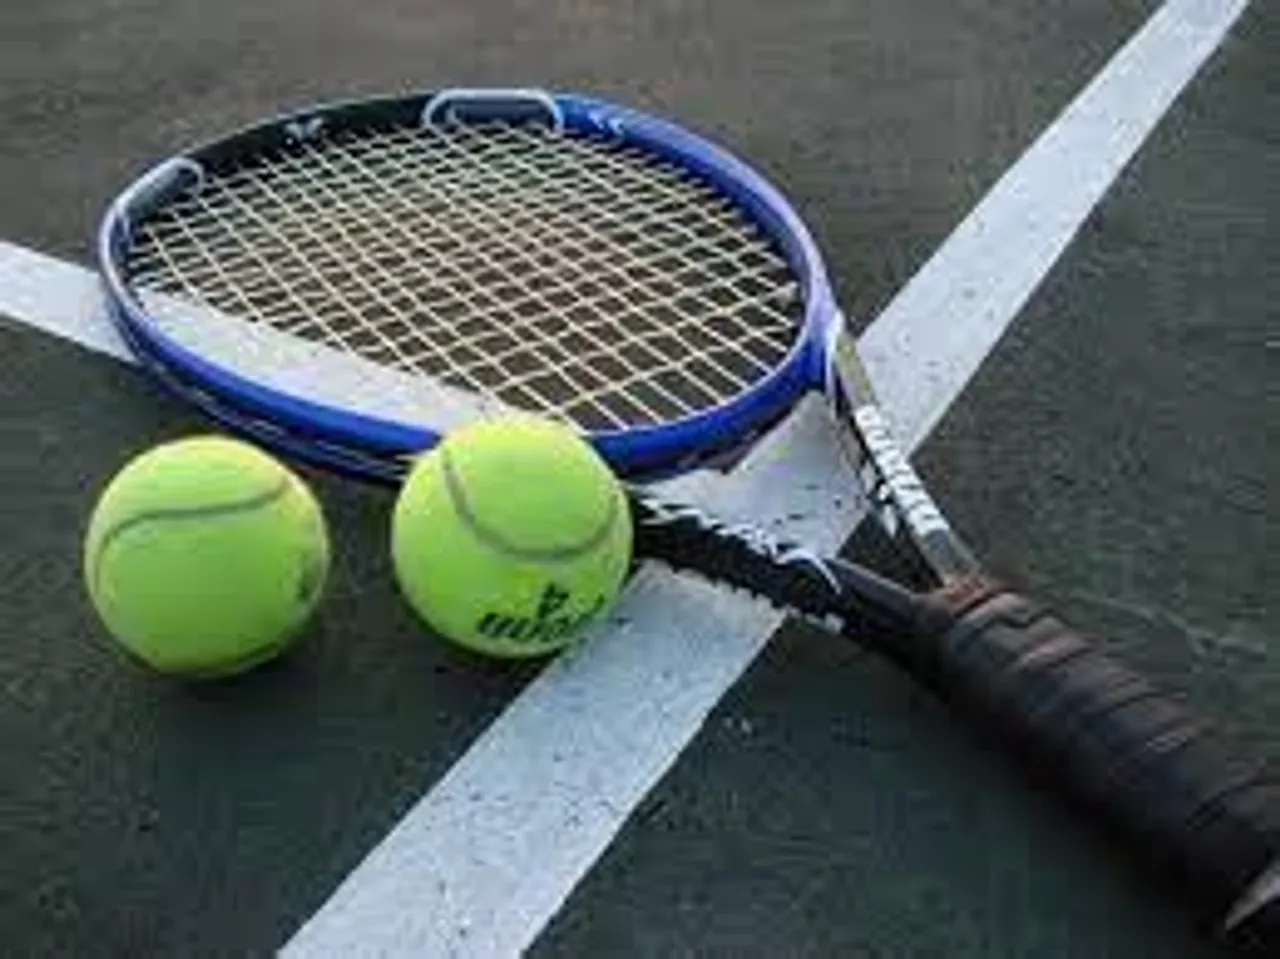 From tennis court to law court due to match fixing